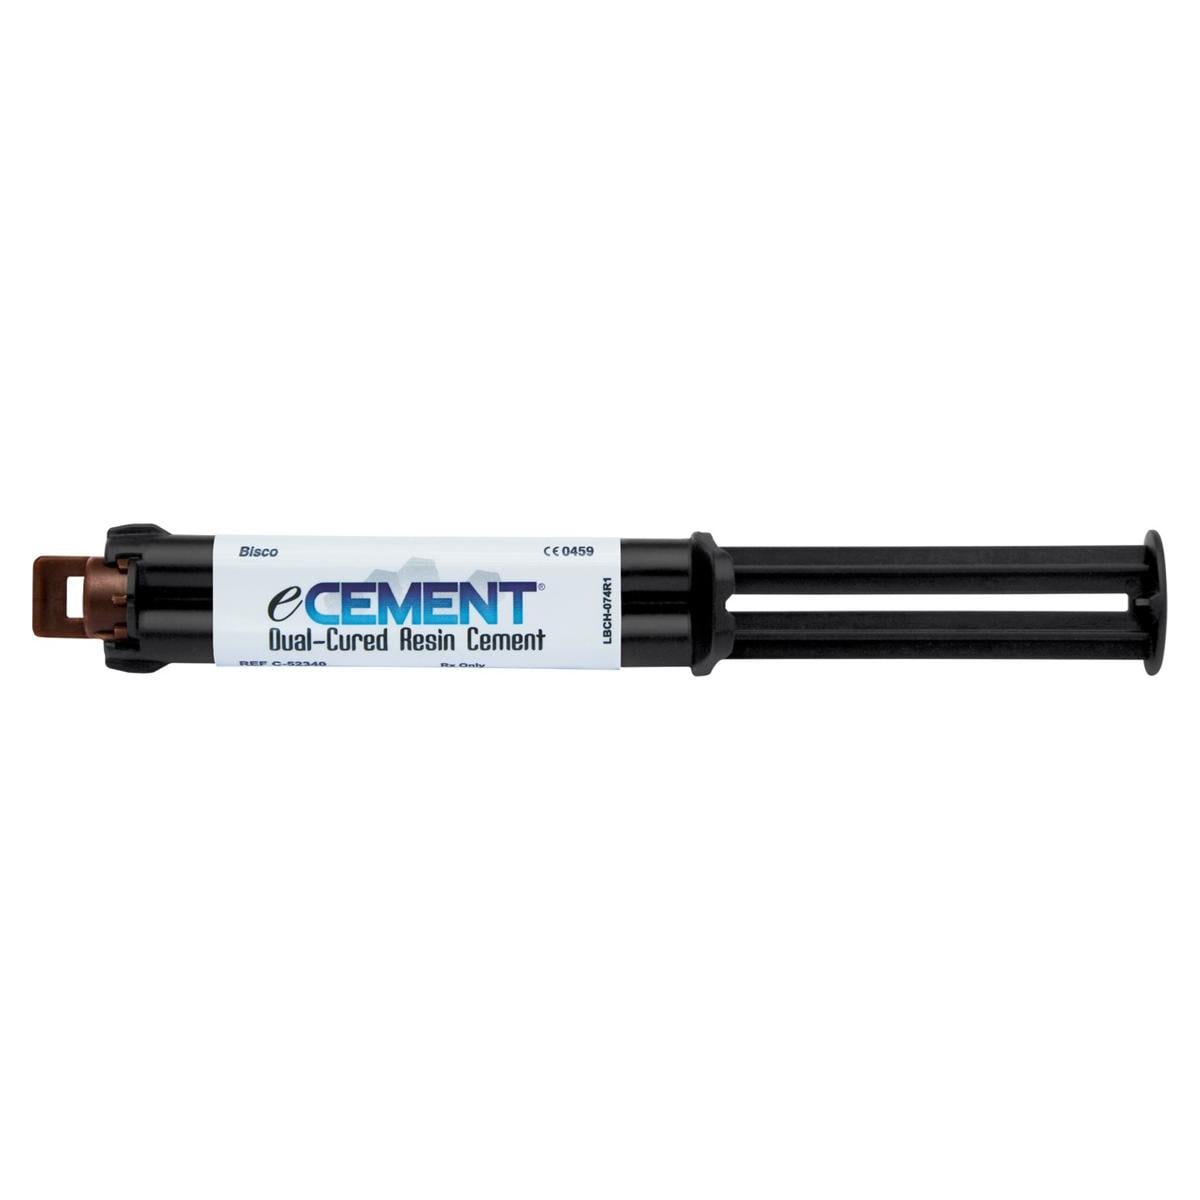 eCEMENT - Dual-Cured Dual-Syringe, 8 g